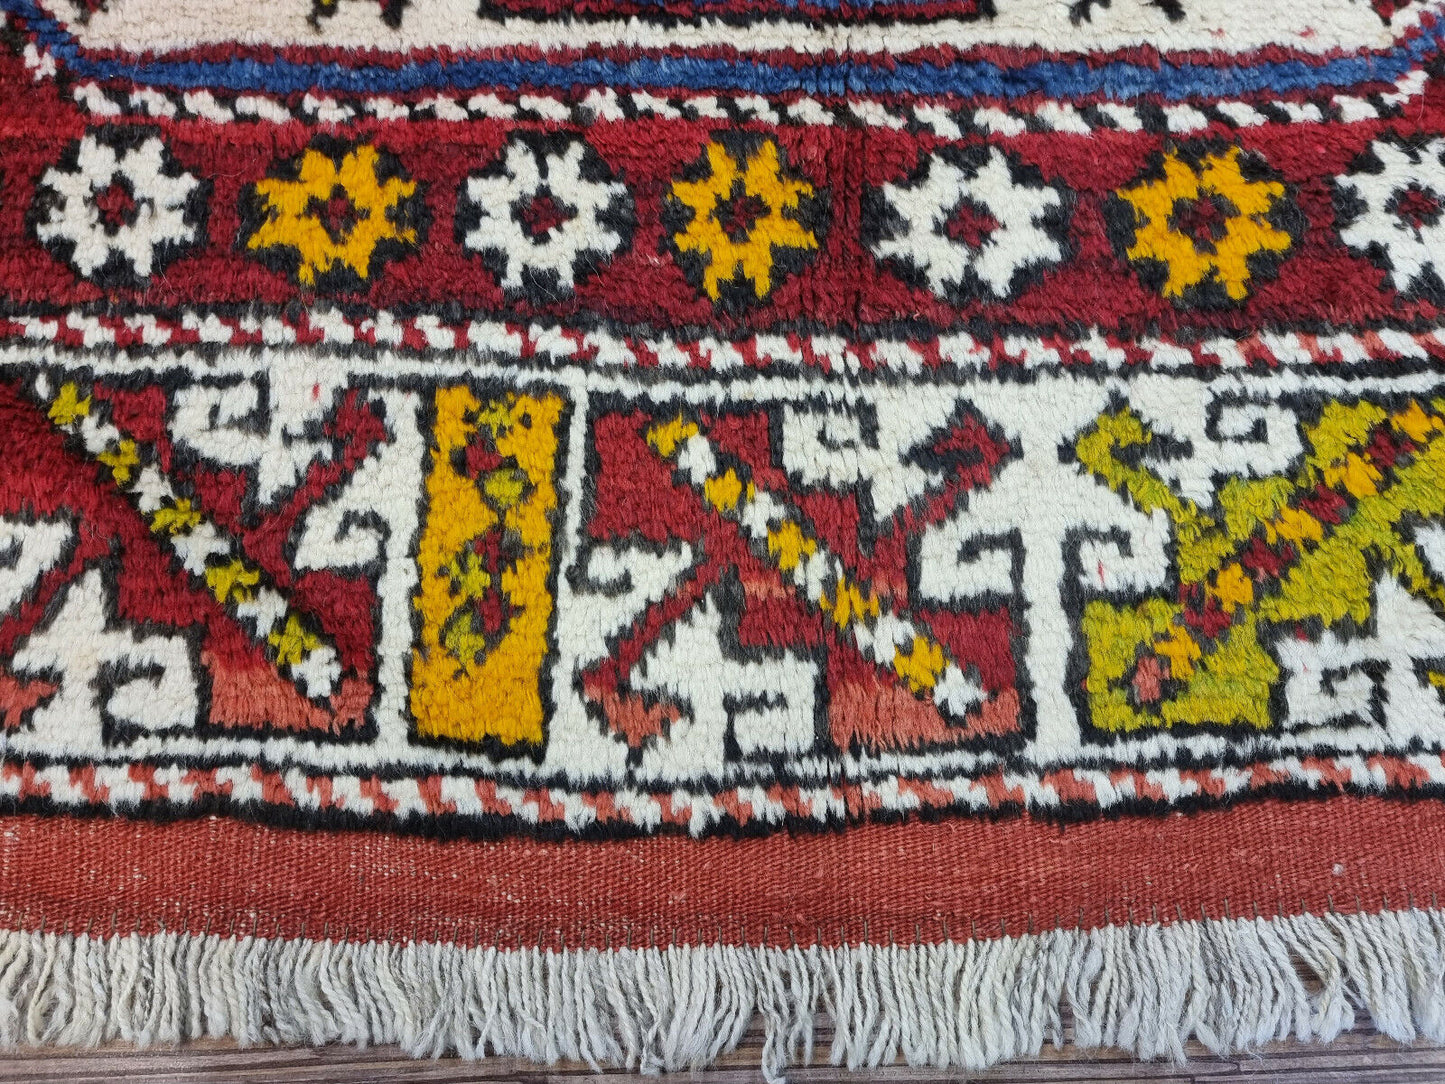 Side view of the Handmade Antique Turkish Anatolian Runner Rug demonstrating its wool material